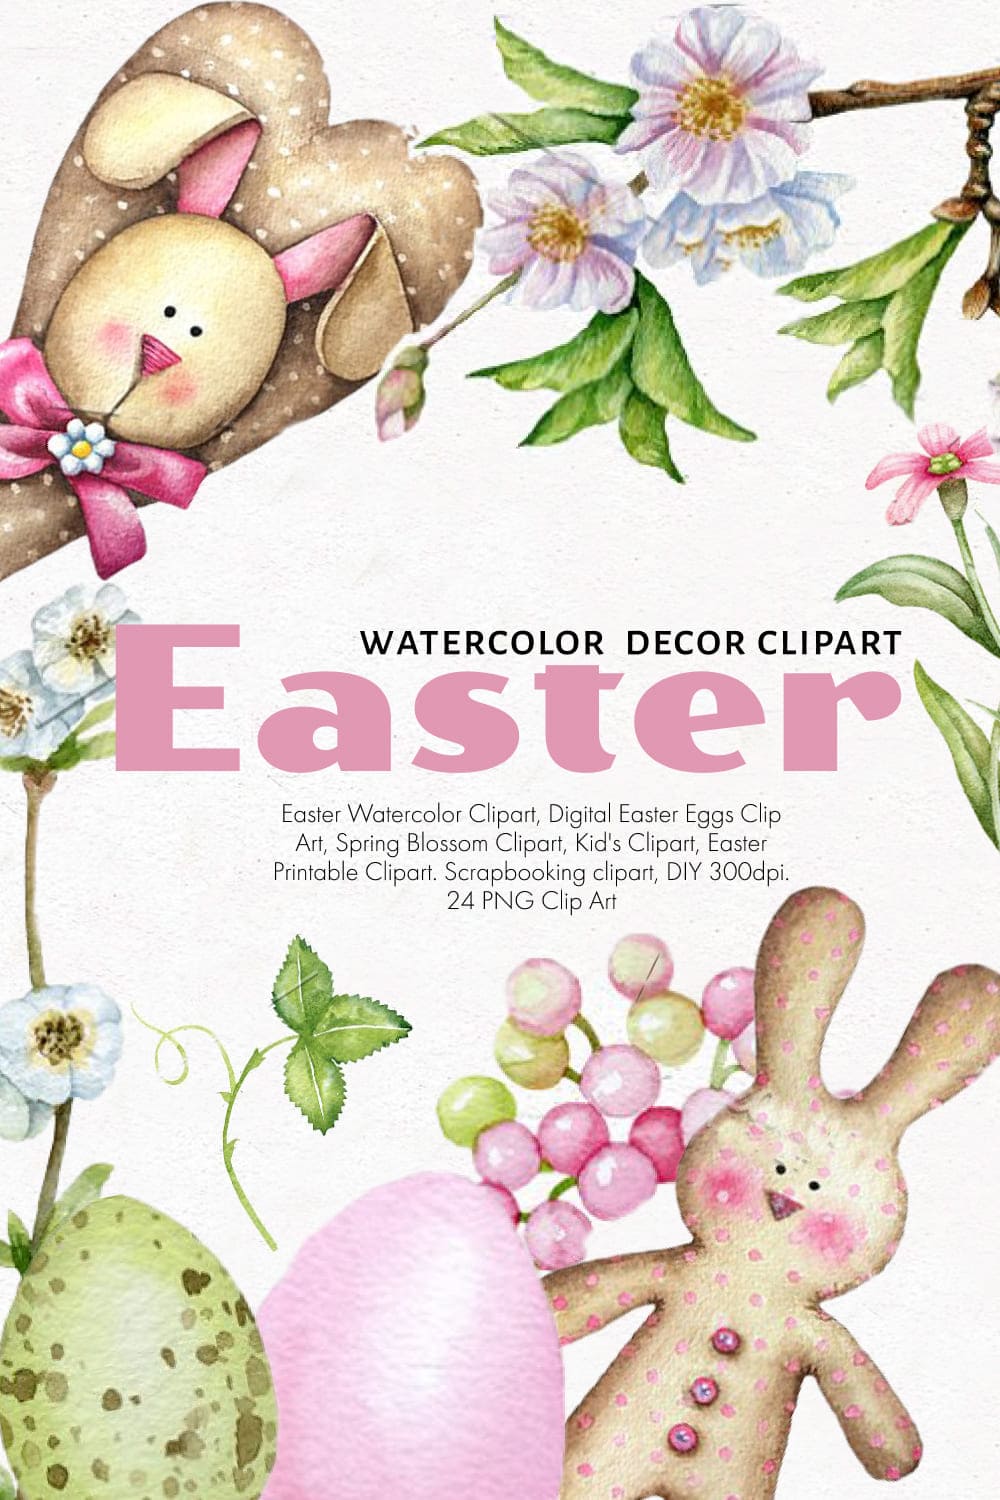 Watercolor Easter decor clipart, picture for pinterest 1000x1500.